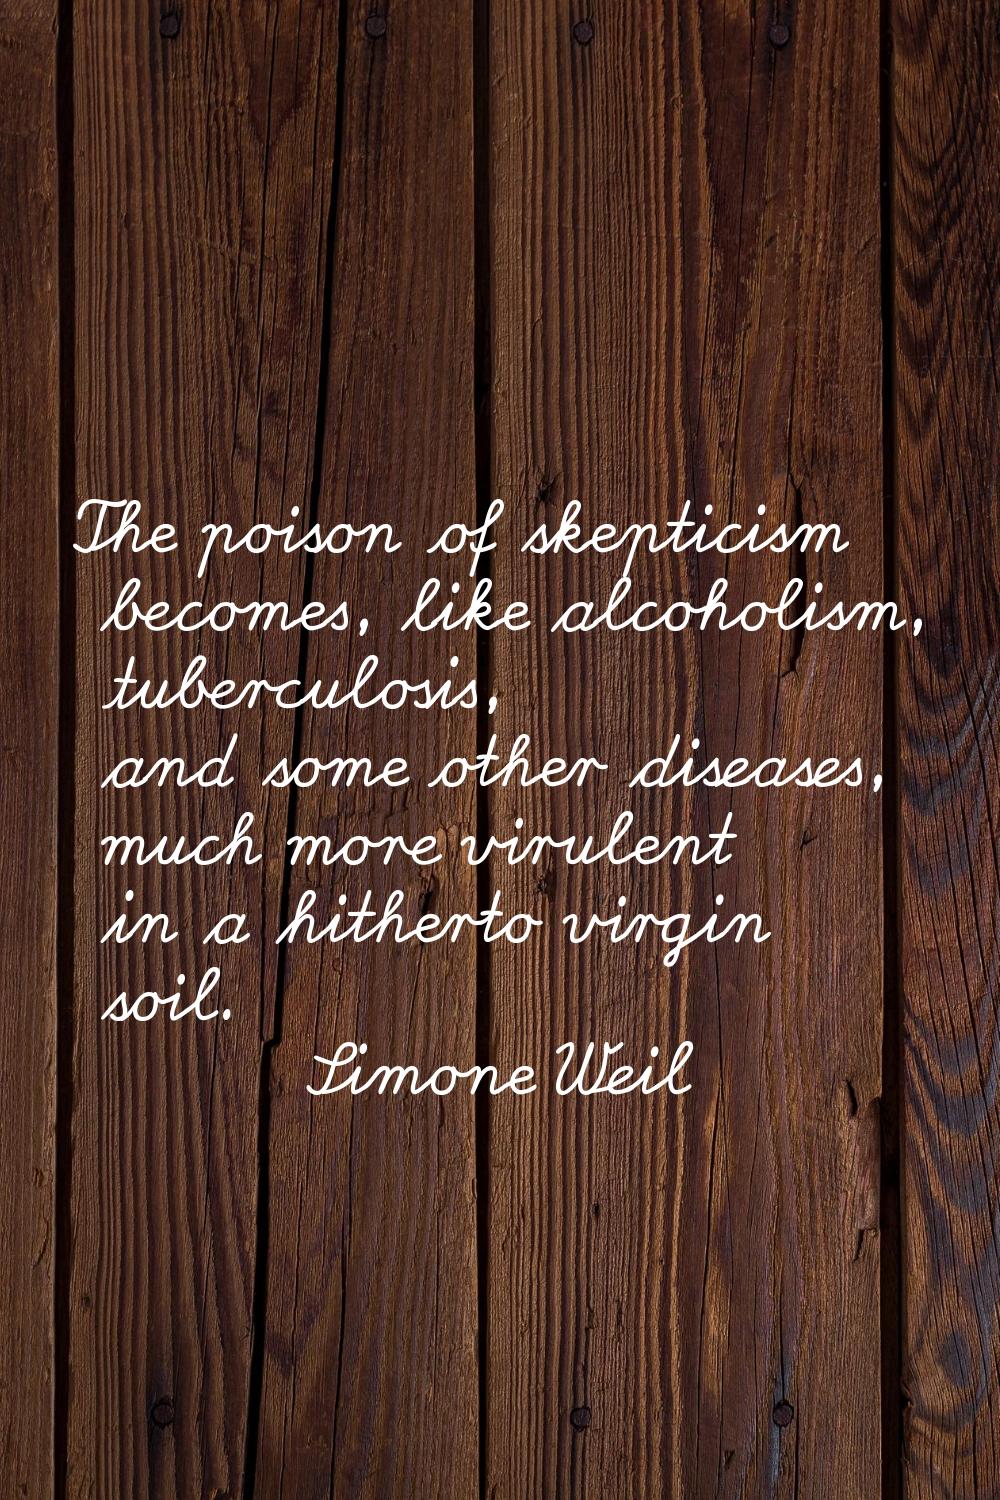 The poison of skepticism becomes, like alcoholism, tuberculosis, and some other diseases, much more